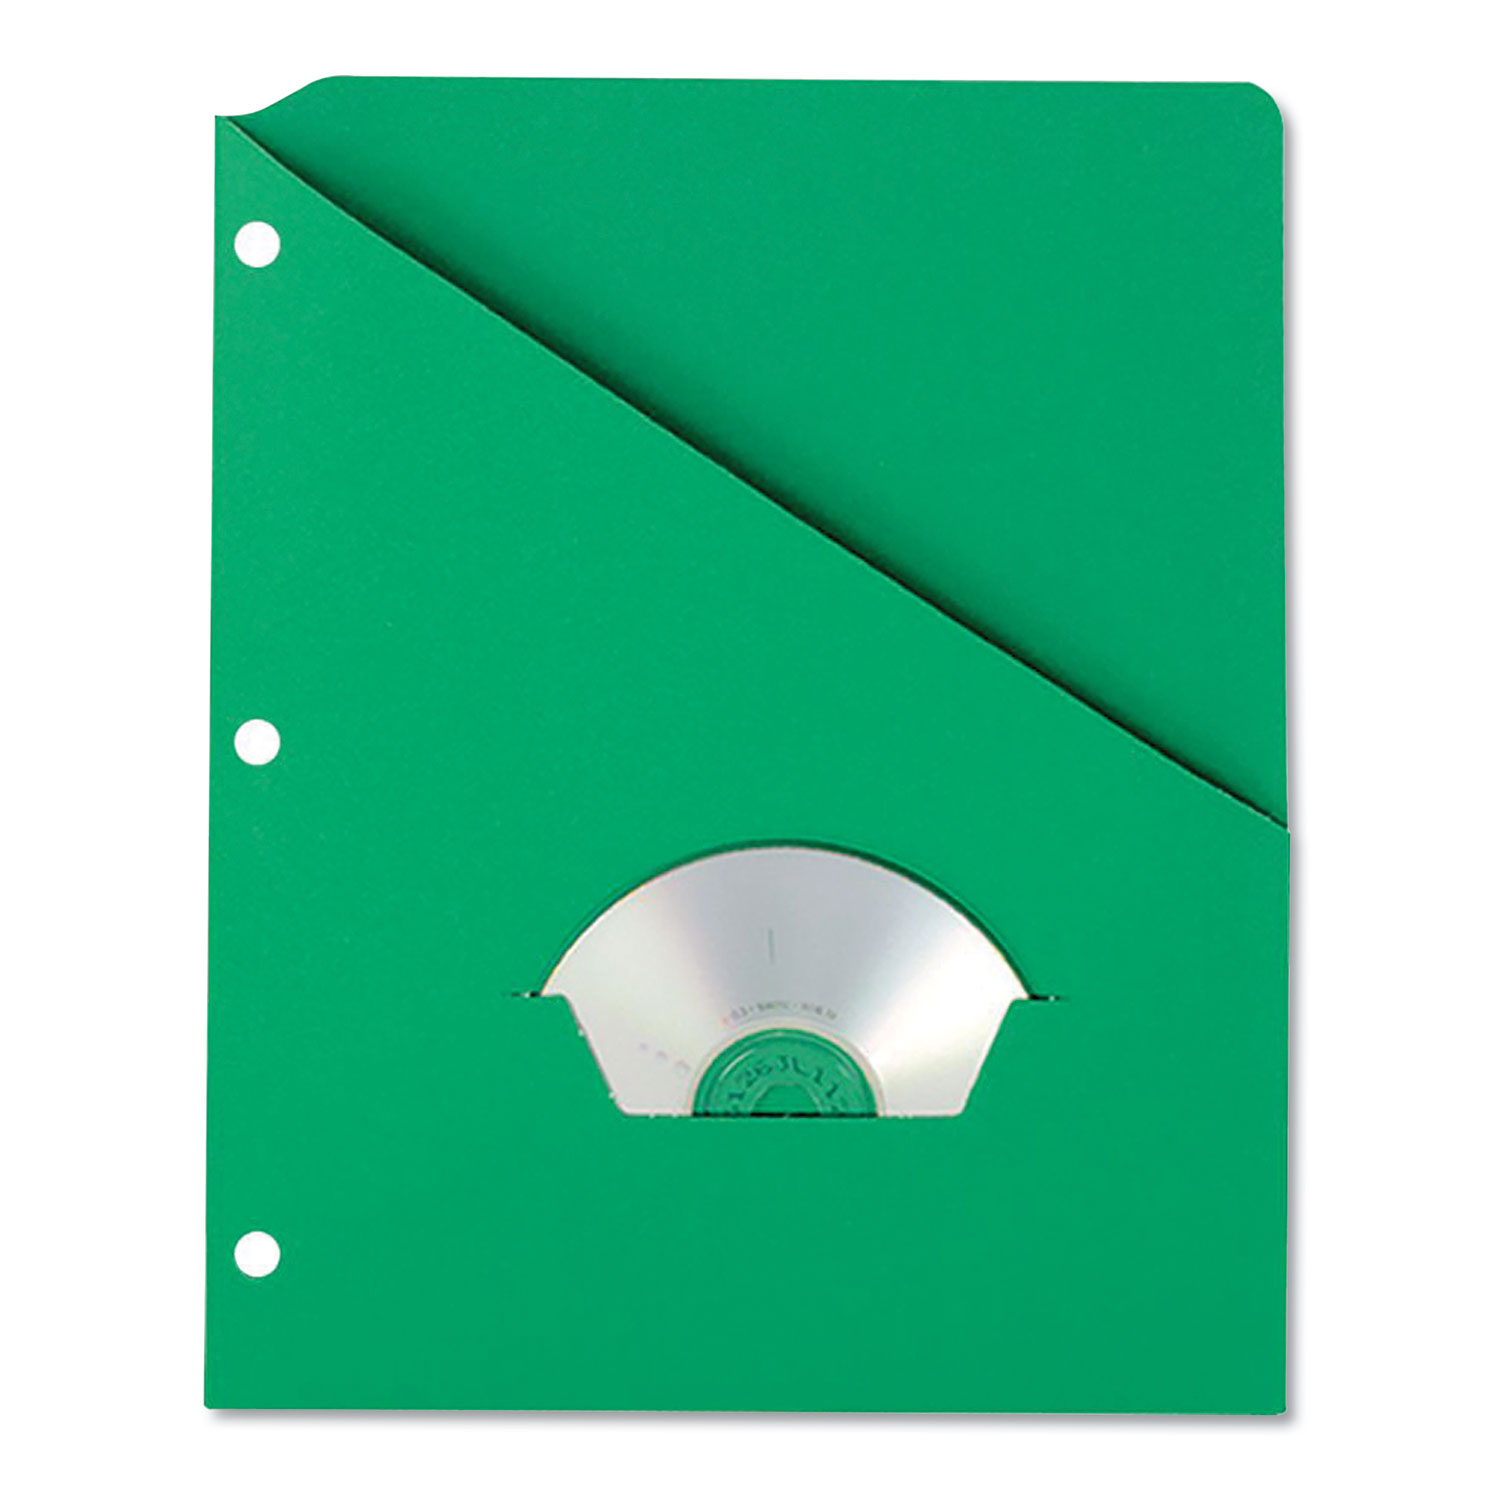 Pocket　Punched,　Supply　Nut,　Project　Size,　25/pack　3-Hole　Letter　Green,　Folders,　Tab,　Straight　Slash　Inc.